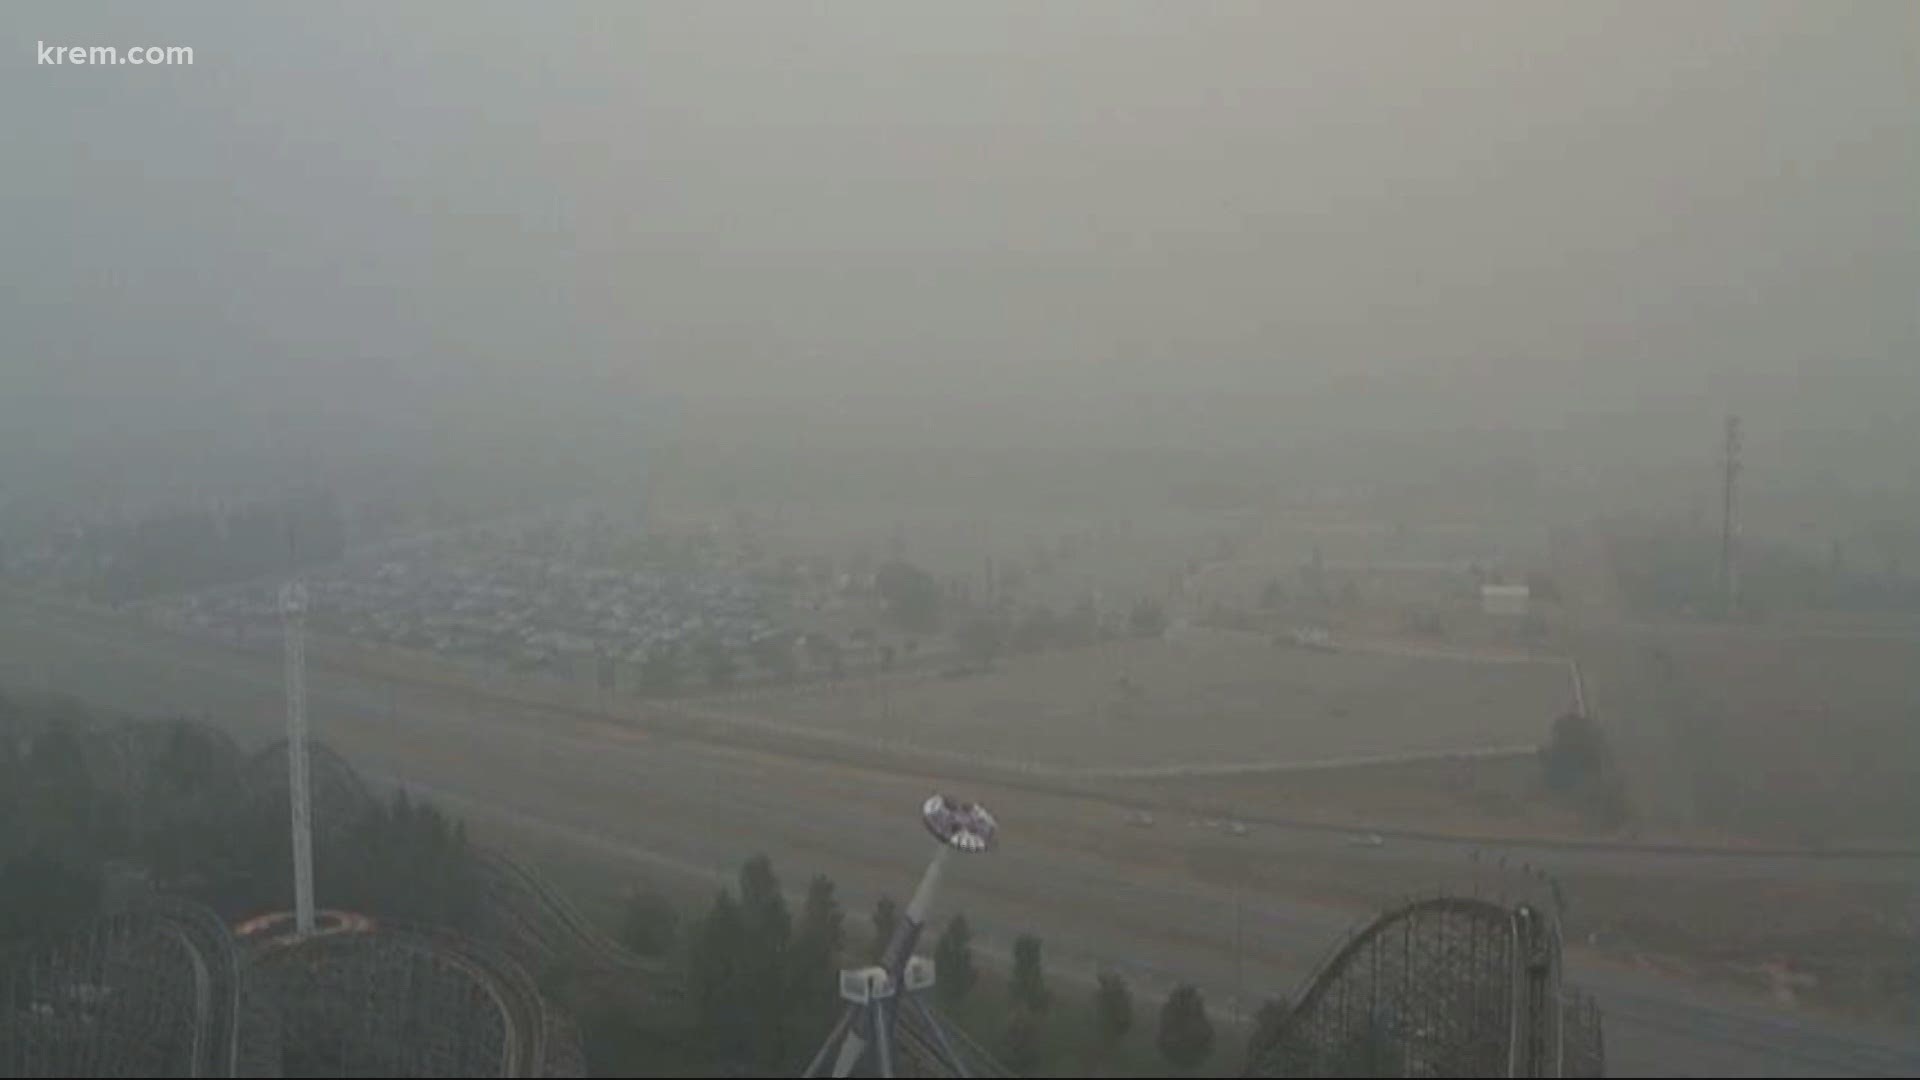 Spokane's Health Officer Dr. Bob Lutz says everyone in the region is put at risk by the wildfire smoke, not just people with underlying conditions.